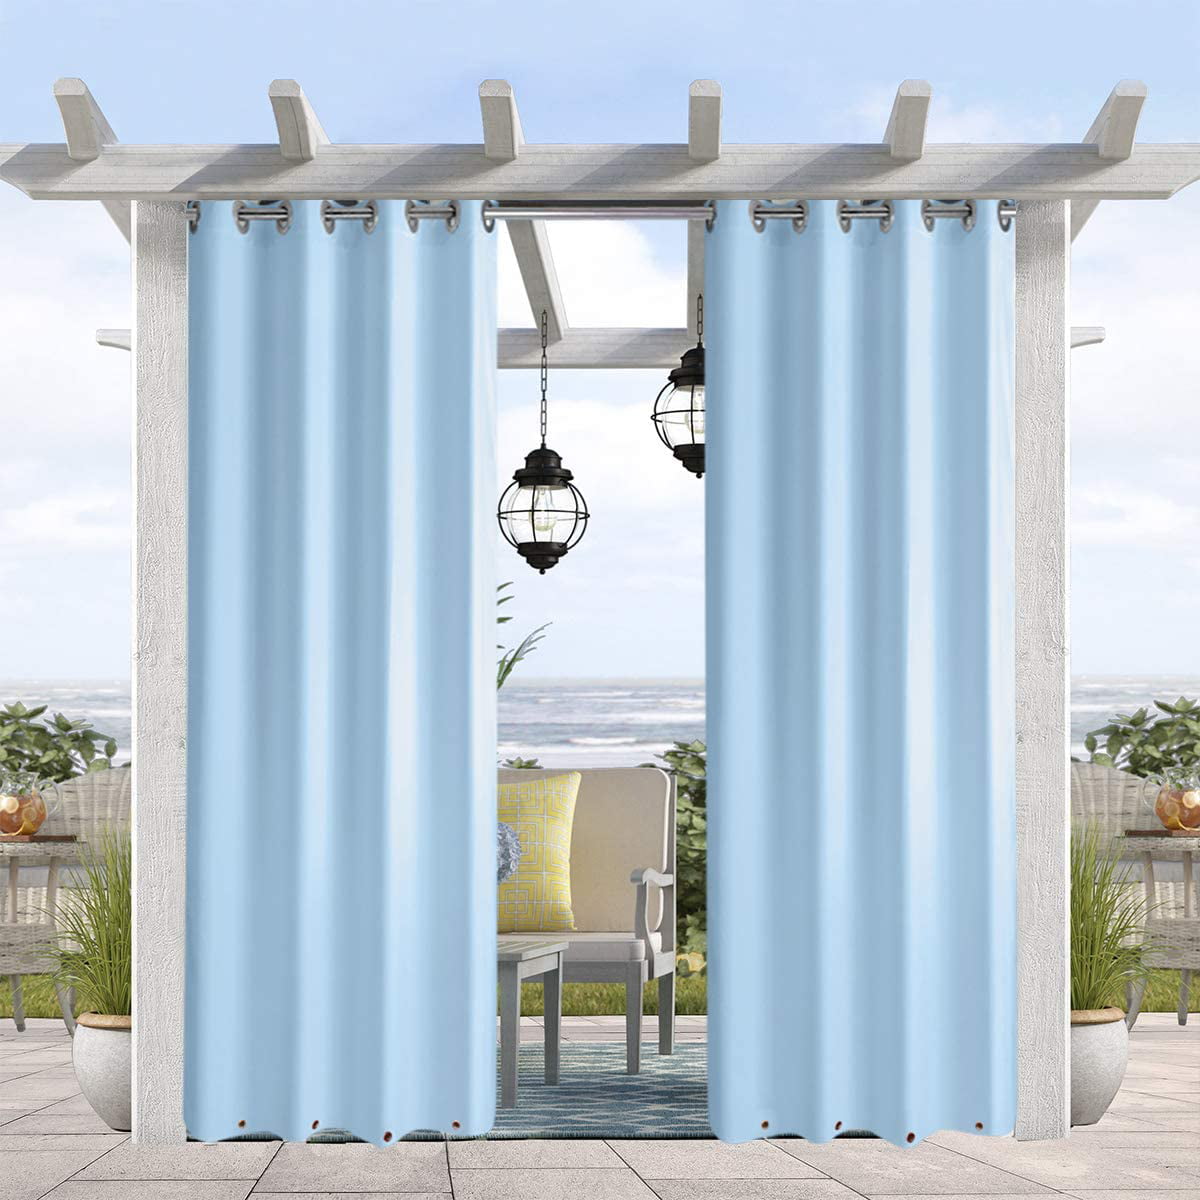 50”x120” Outdoor Curtains Panel for Porch Patio，UV Ray Protected and Waterproof 